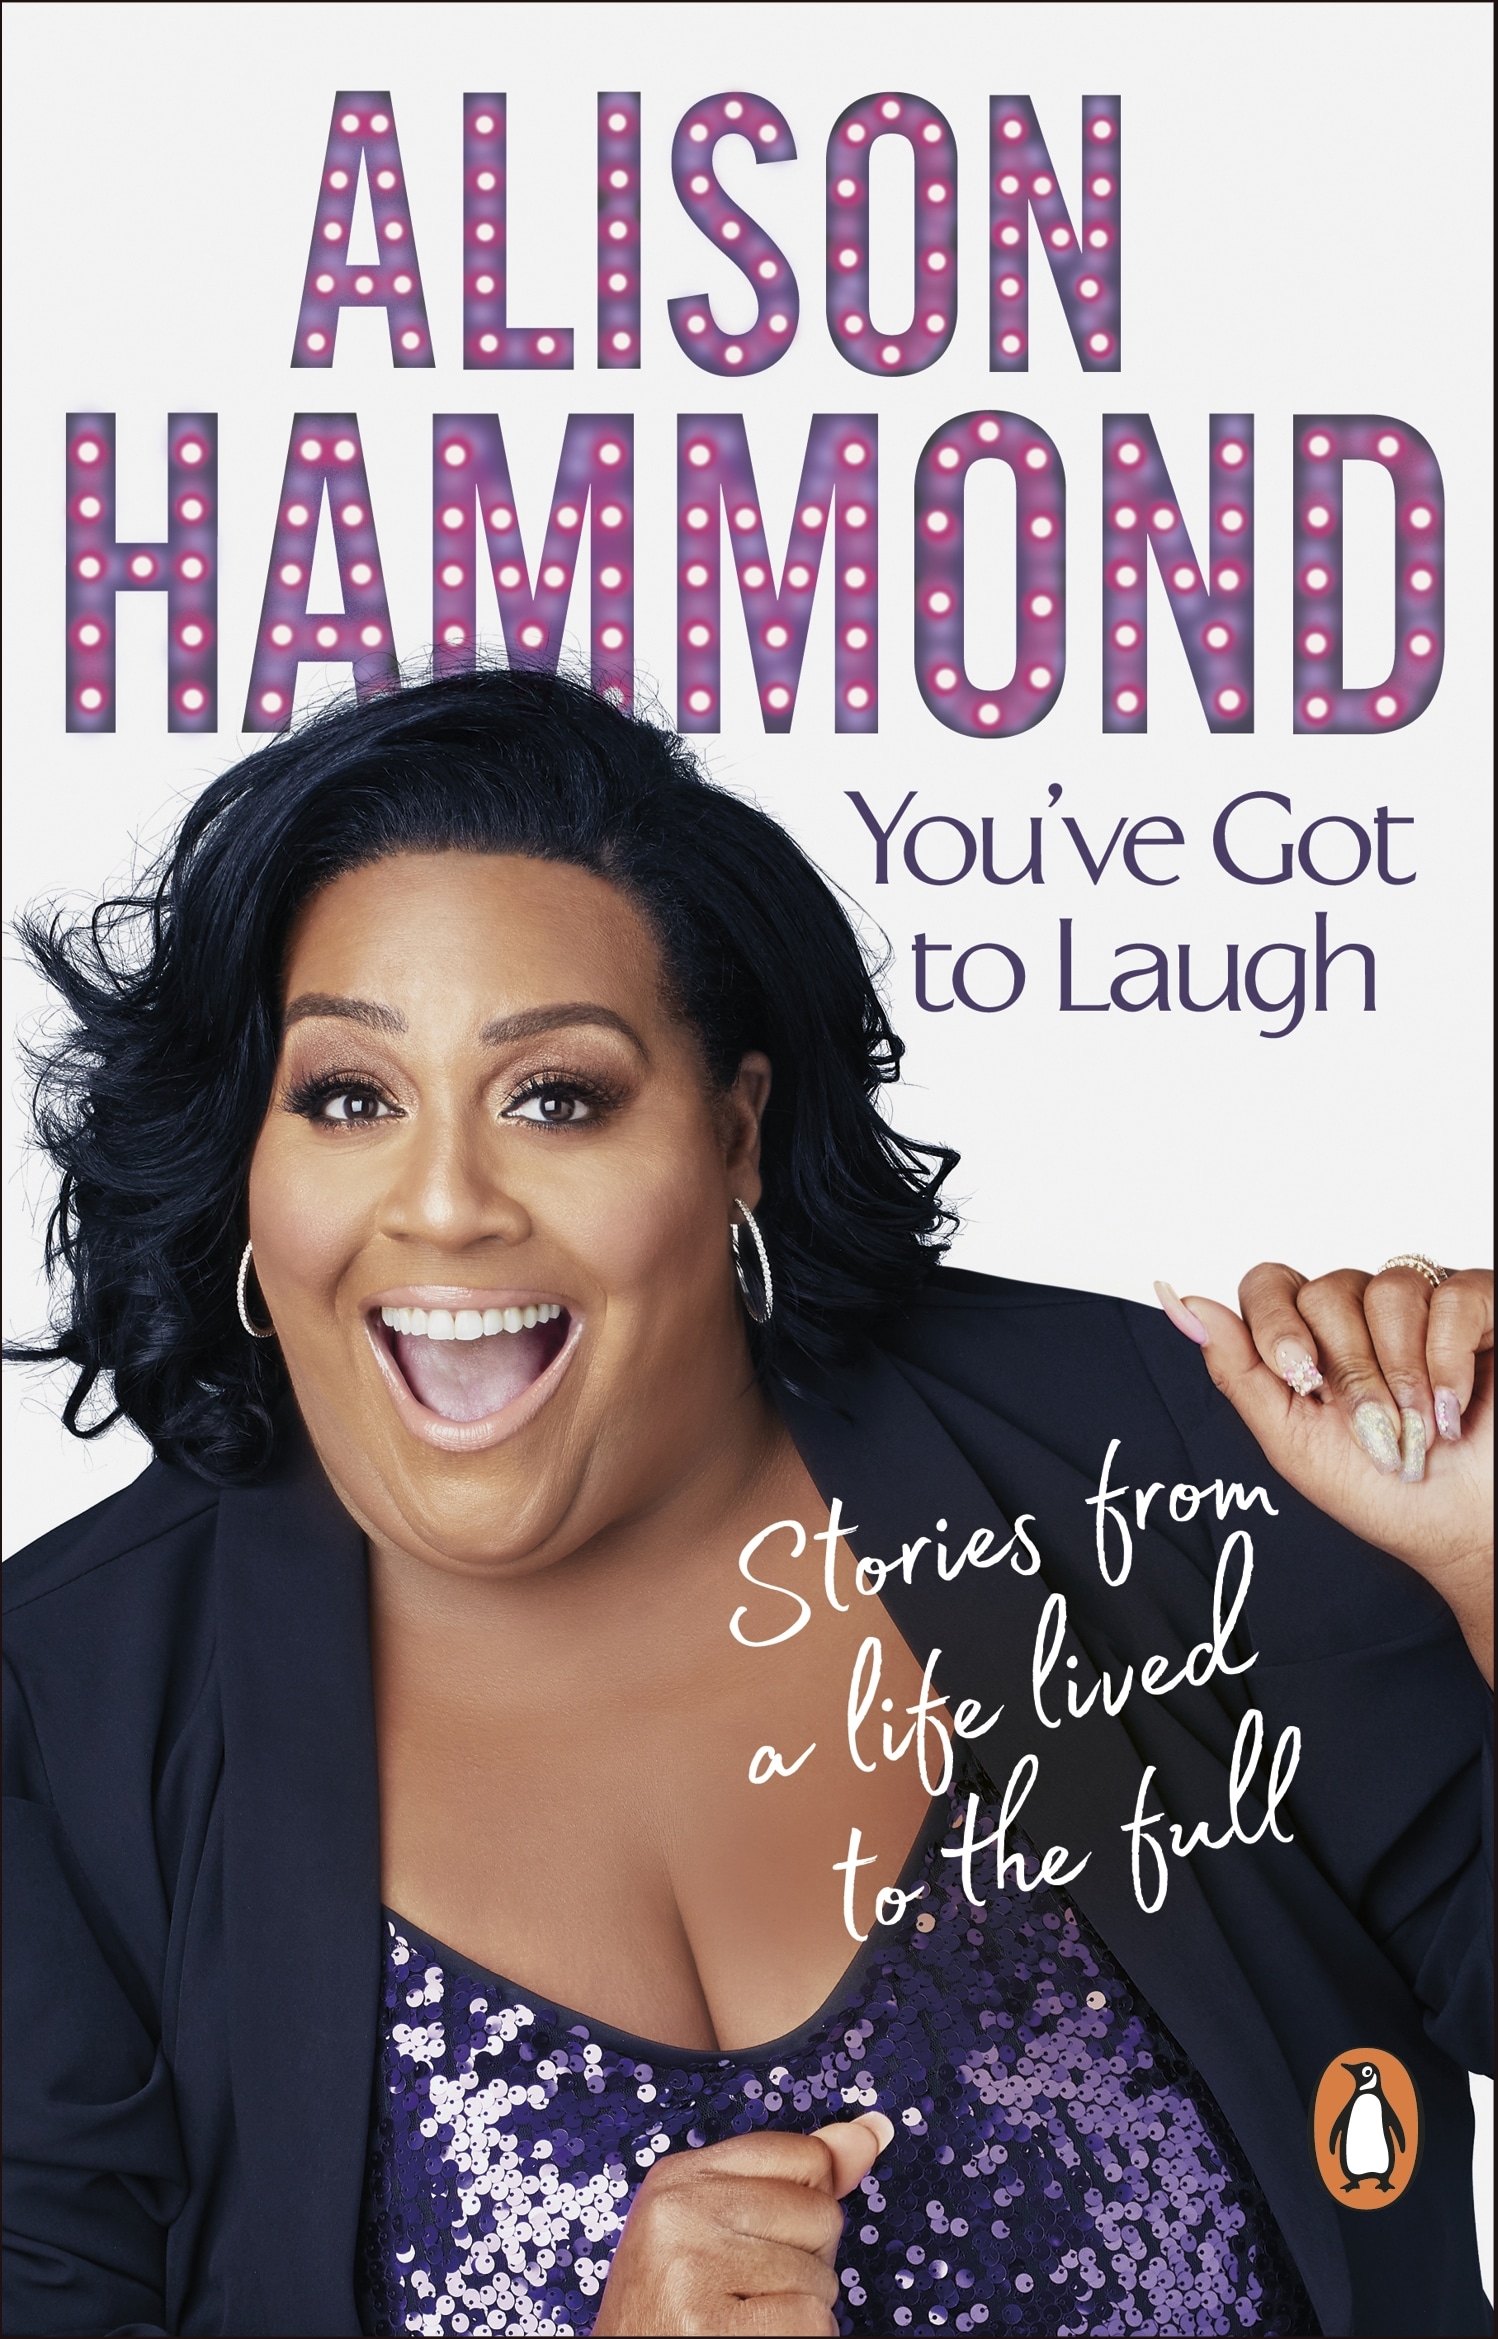 Book “You’ve Got To Laugh” by Alison Hammond — April 14, 2022